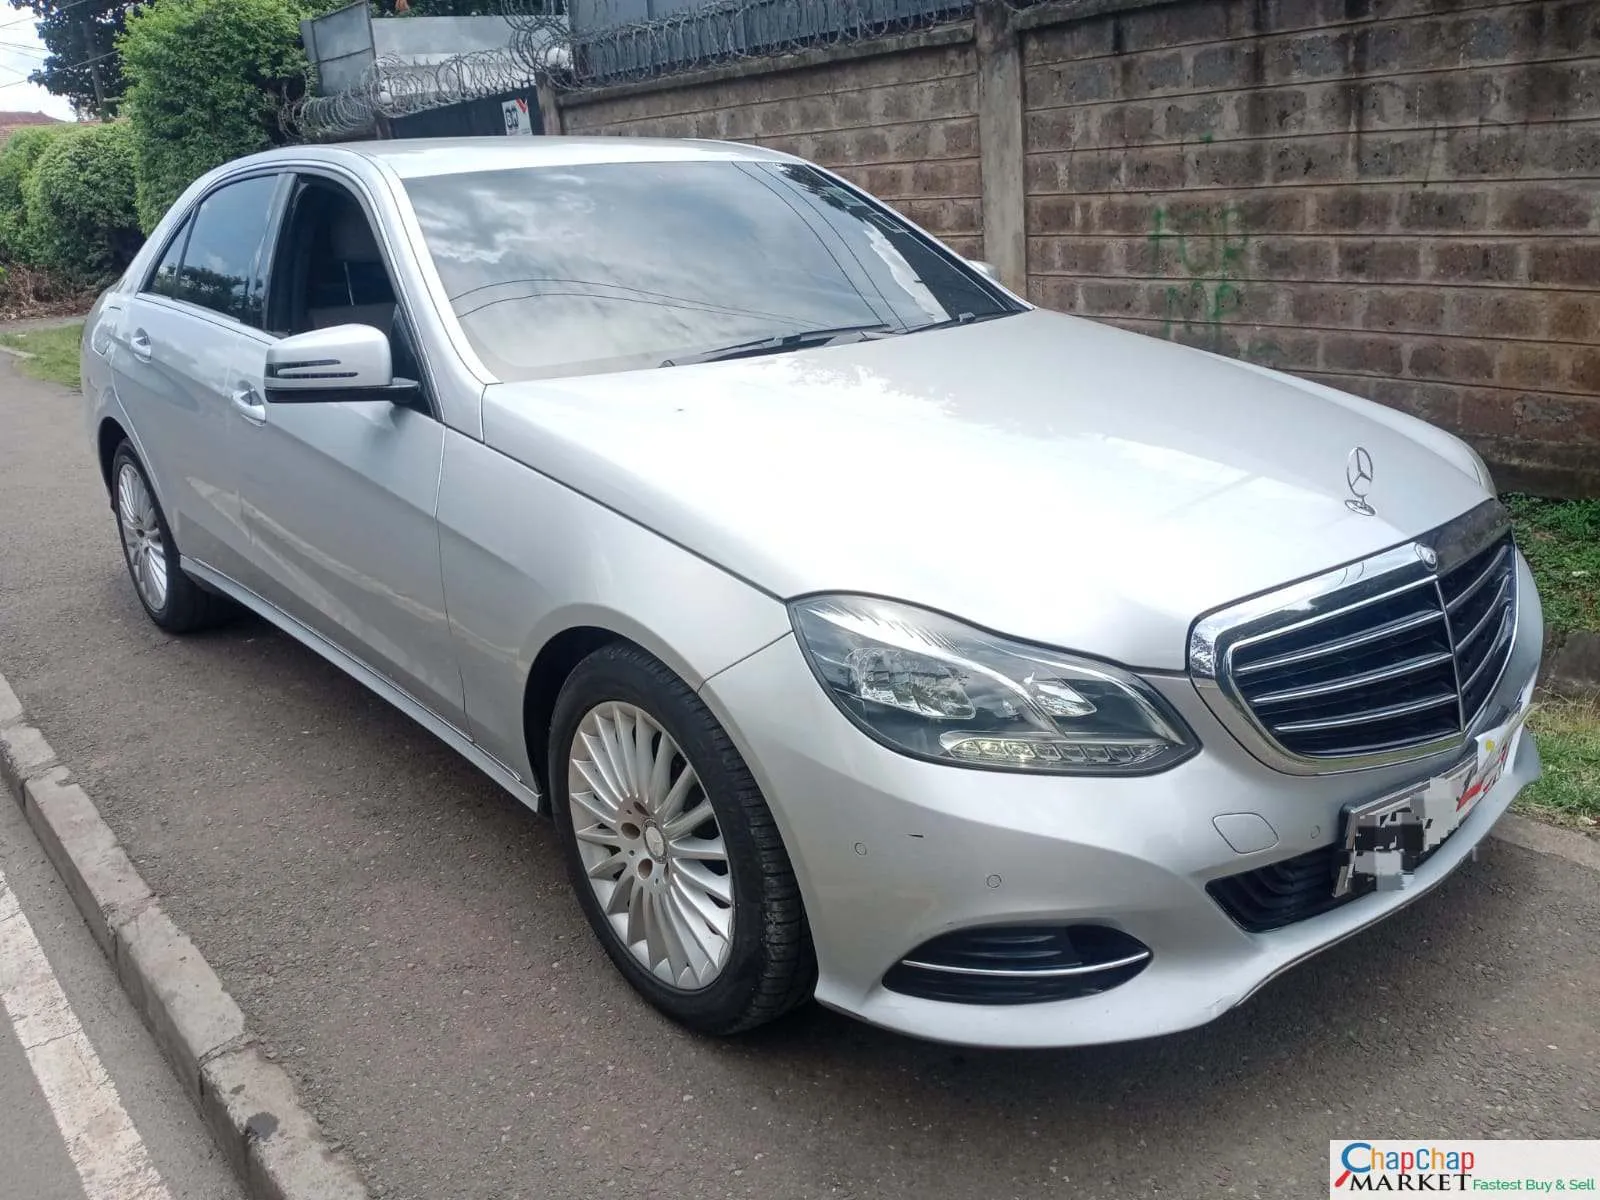 Mercedes Benz E250 🔥 QUICK SALE You Pay 30% DEPOSIT Trade in OK hire purchase installments